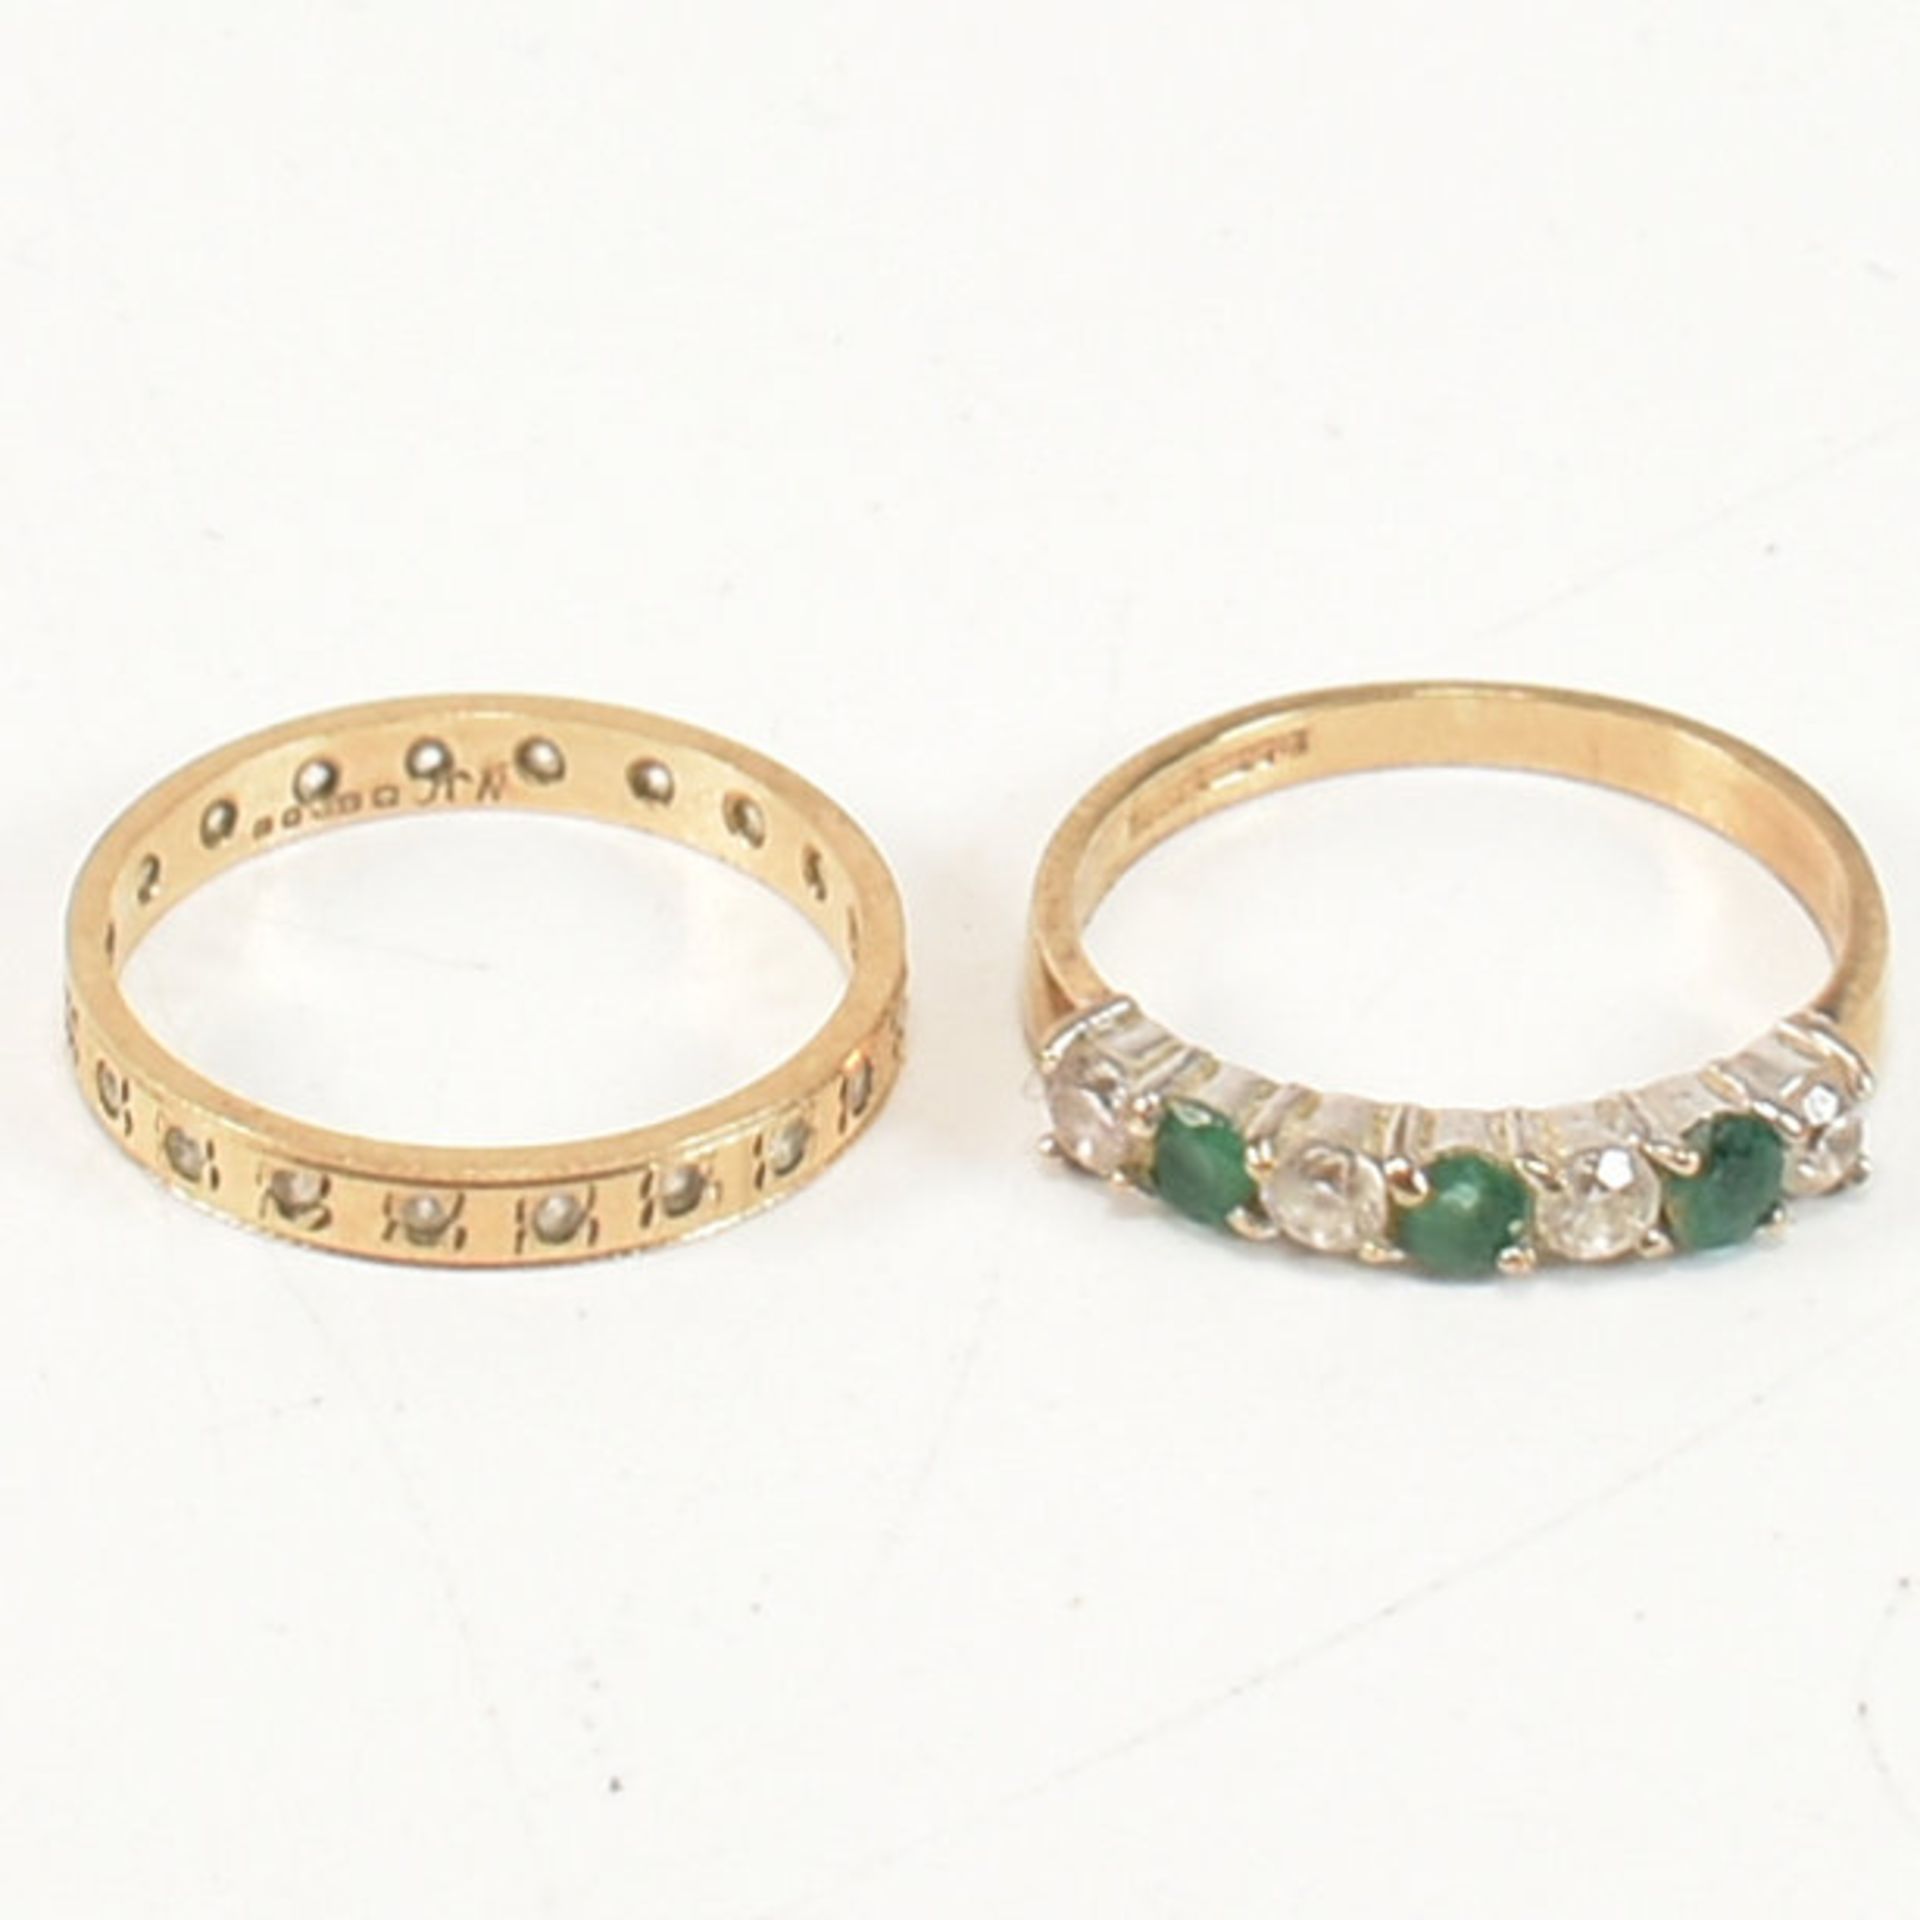 TWO HALLMARKED 9CT GOLD GEM SET RINGS - Image 2 of 11